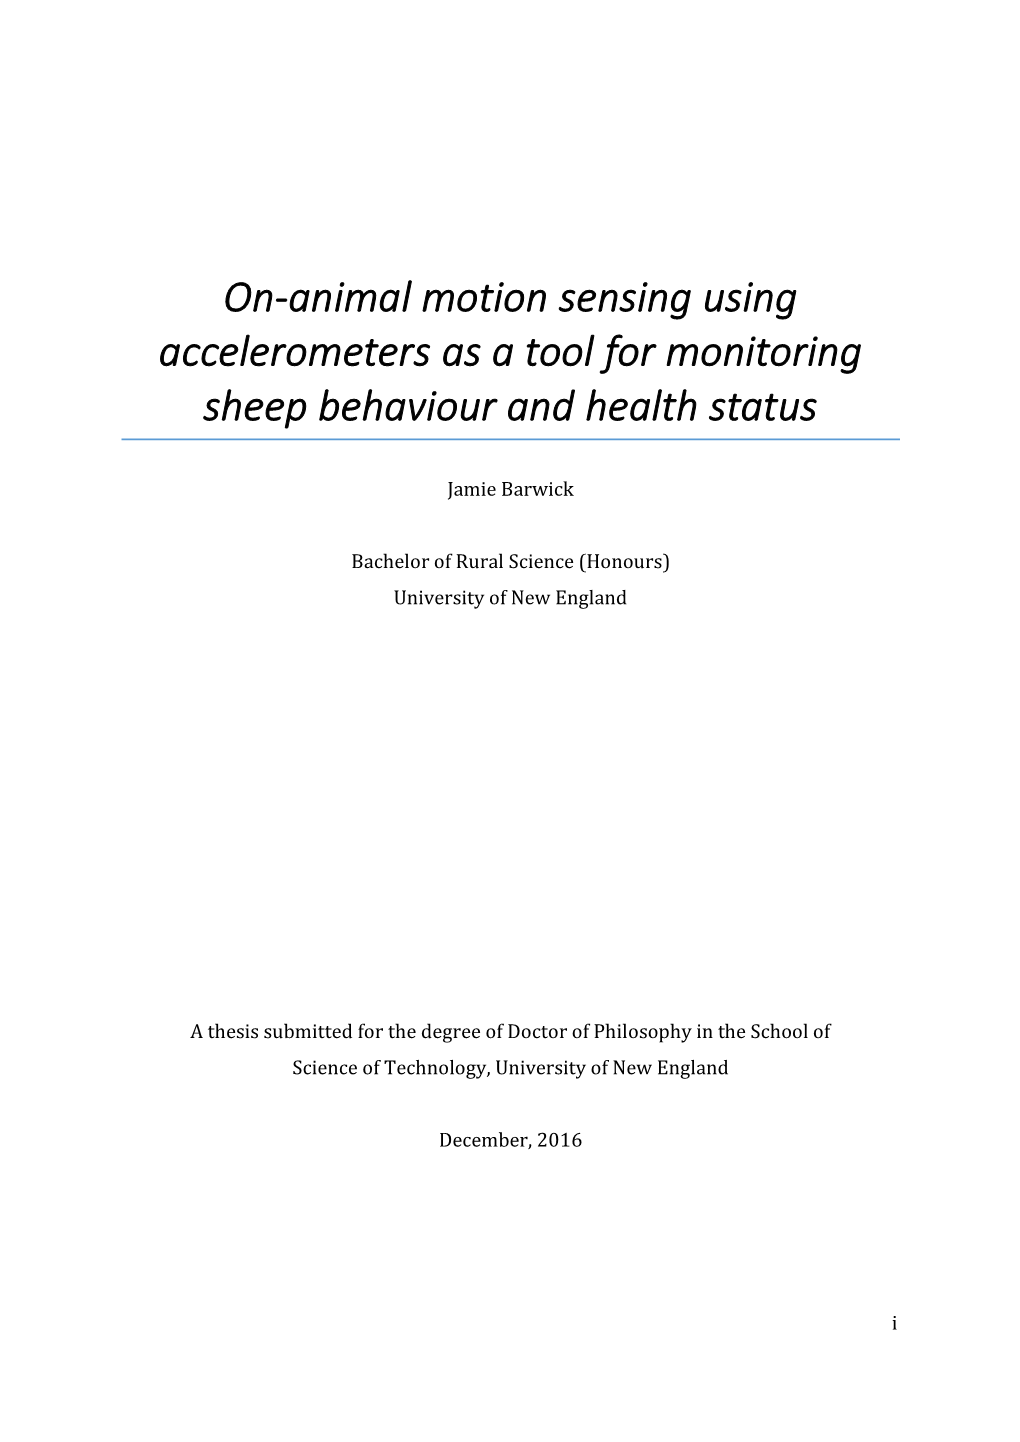 On-Animal Motion Sensing Using Accelerometers As a Tool for Monitoring Sheep Behaviour and Health Status